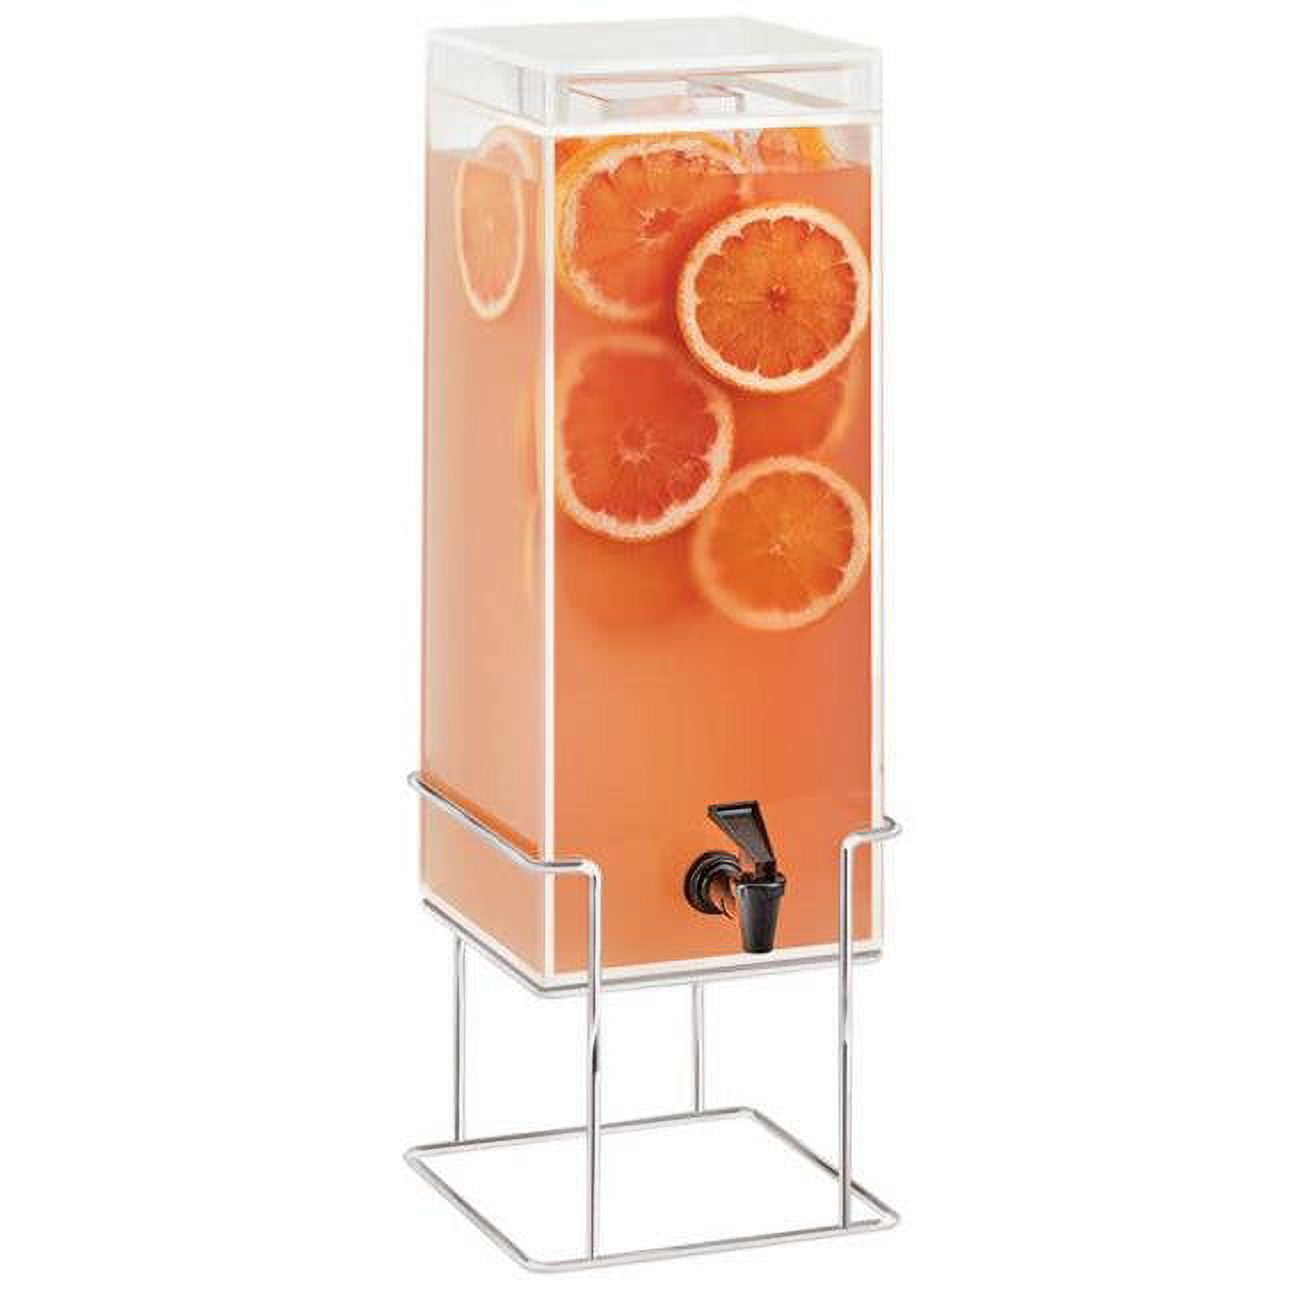 22002-3inf-49 3 Gal Square Beverage Dispenser With Infusion Chamber - Metal Base, Chrome - 8.125 X 9.75 X 25.75 In.